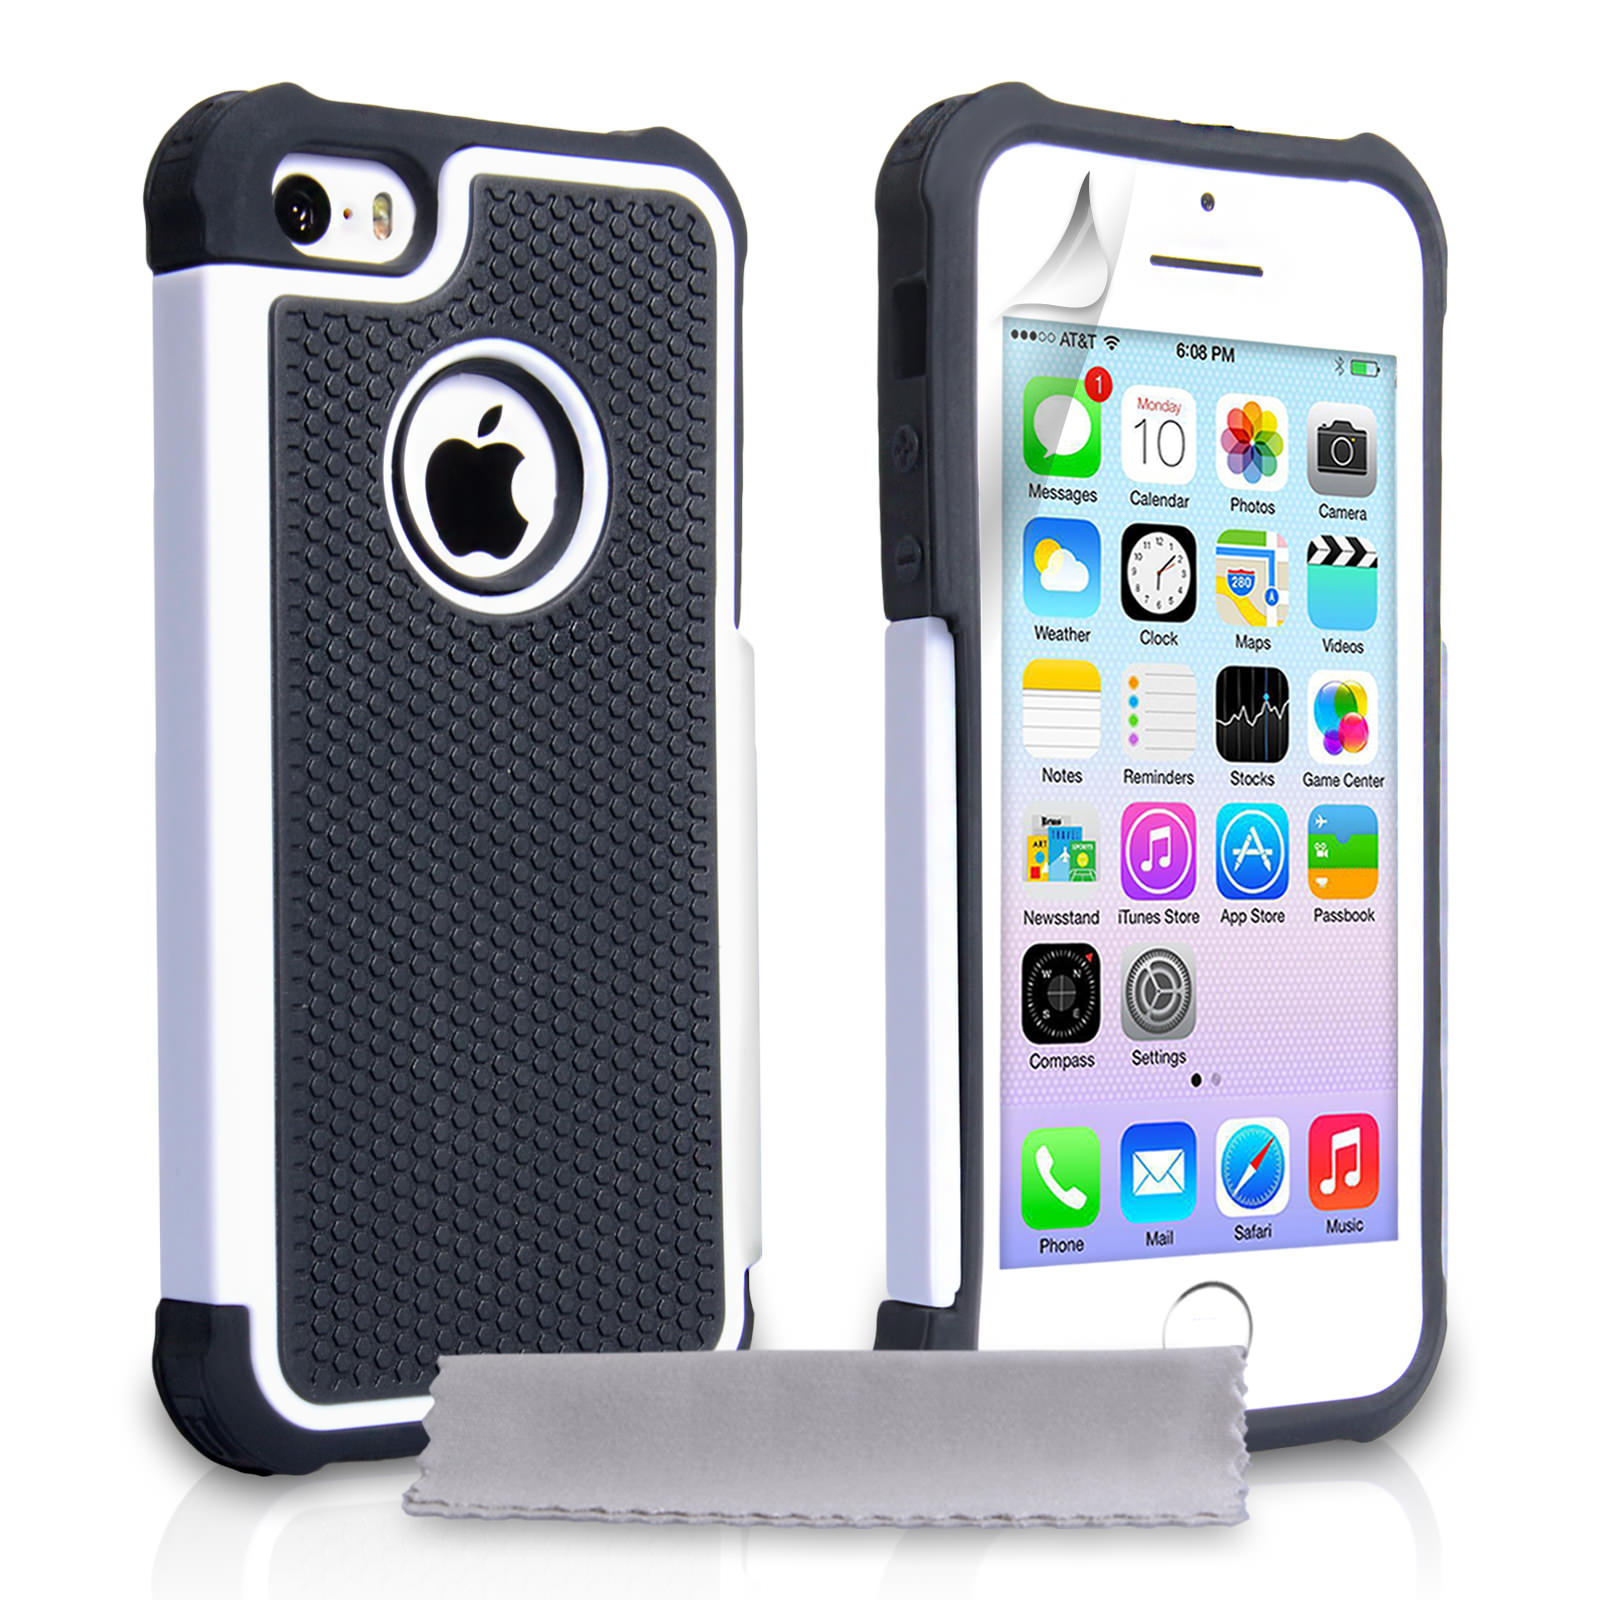 YouSave Accessories iPhone 5 / 5S Grip Combo Case - White